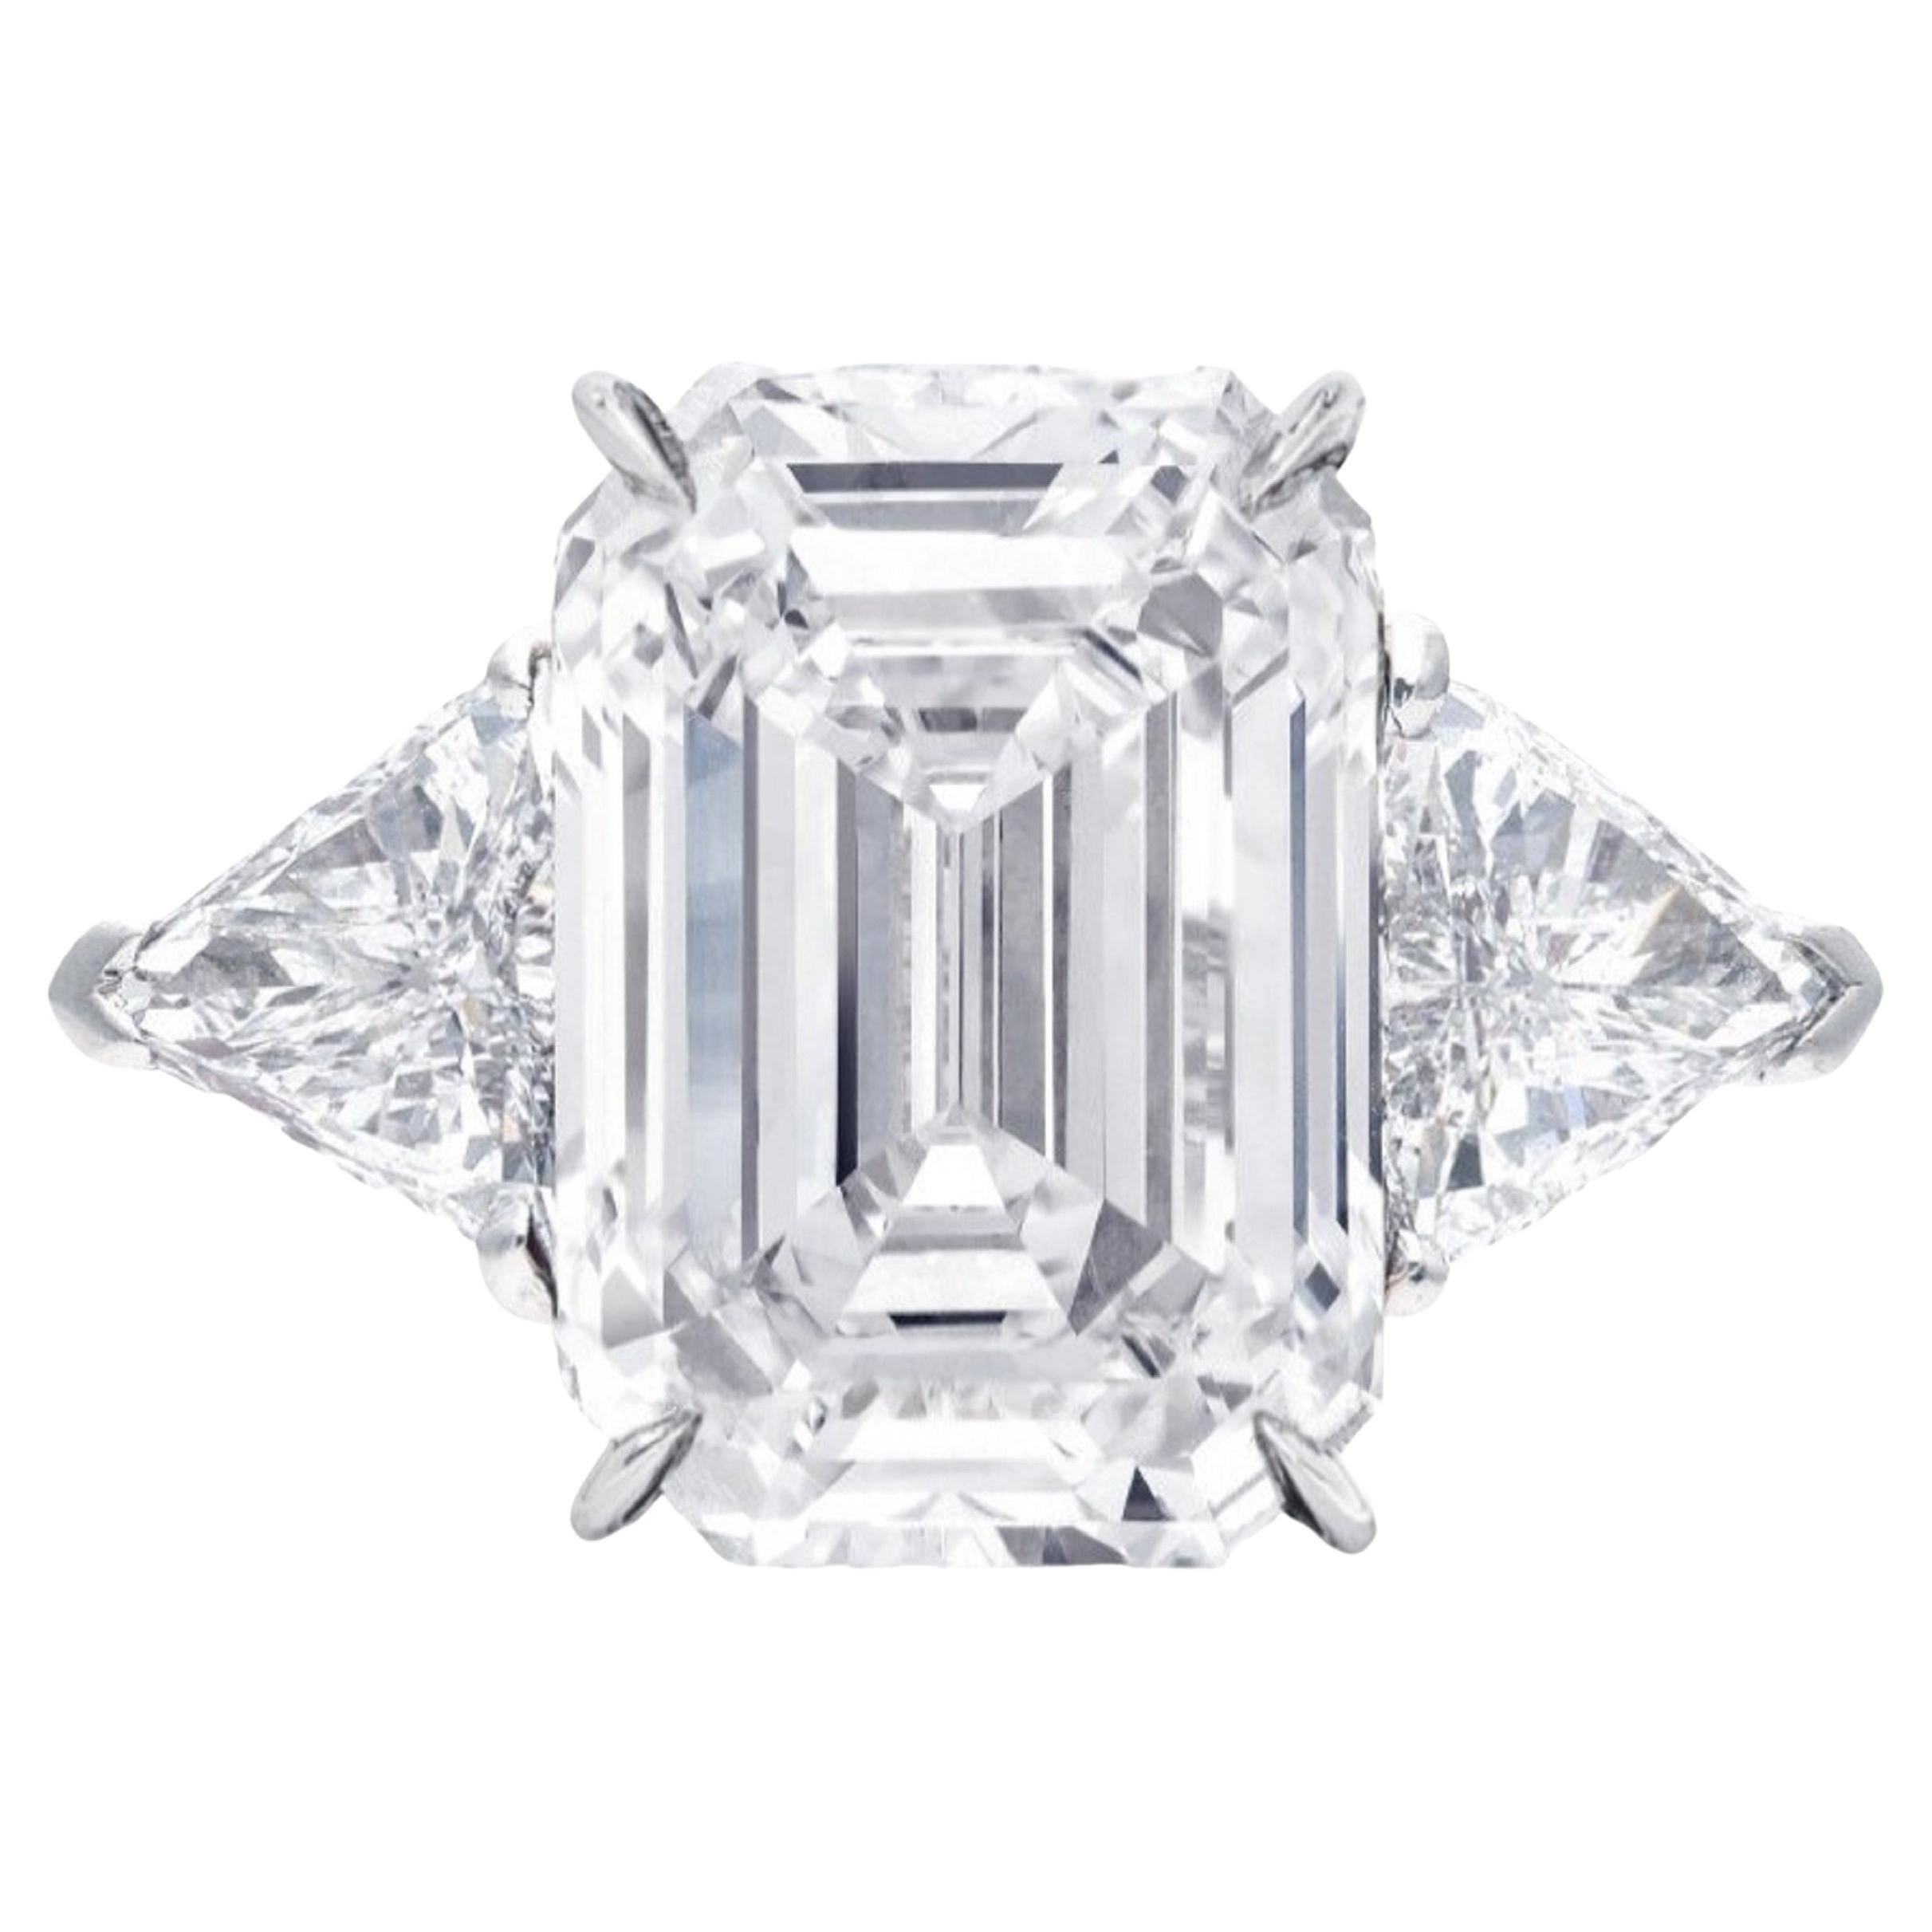 Exceptional GIA Certified 6 Carat Emerald Cut Diamond Ring